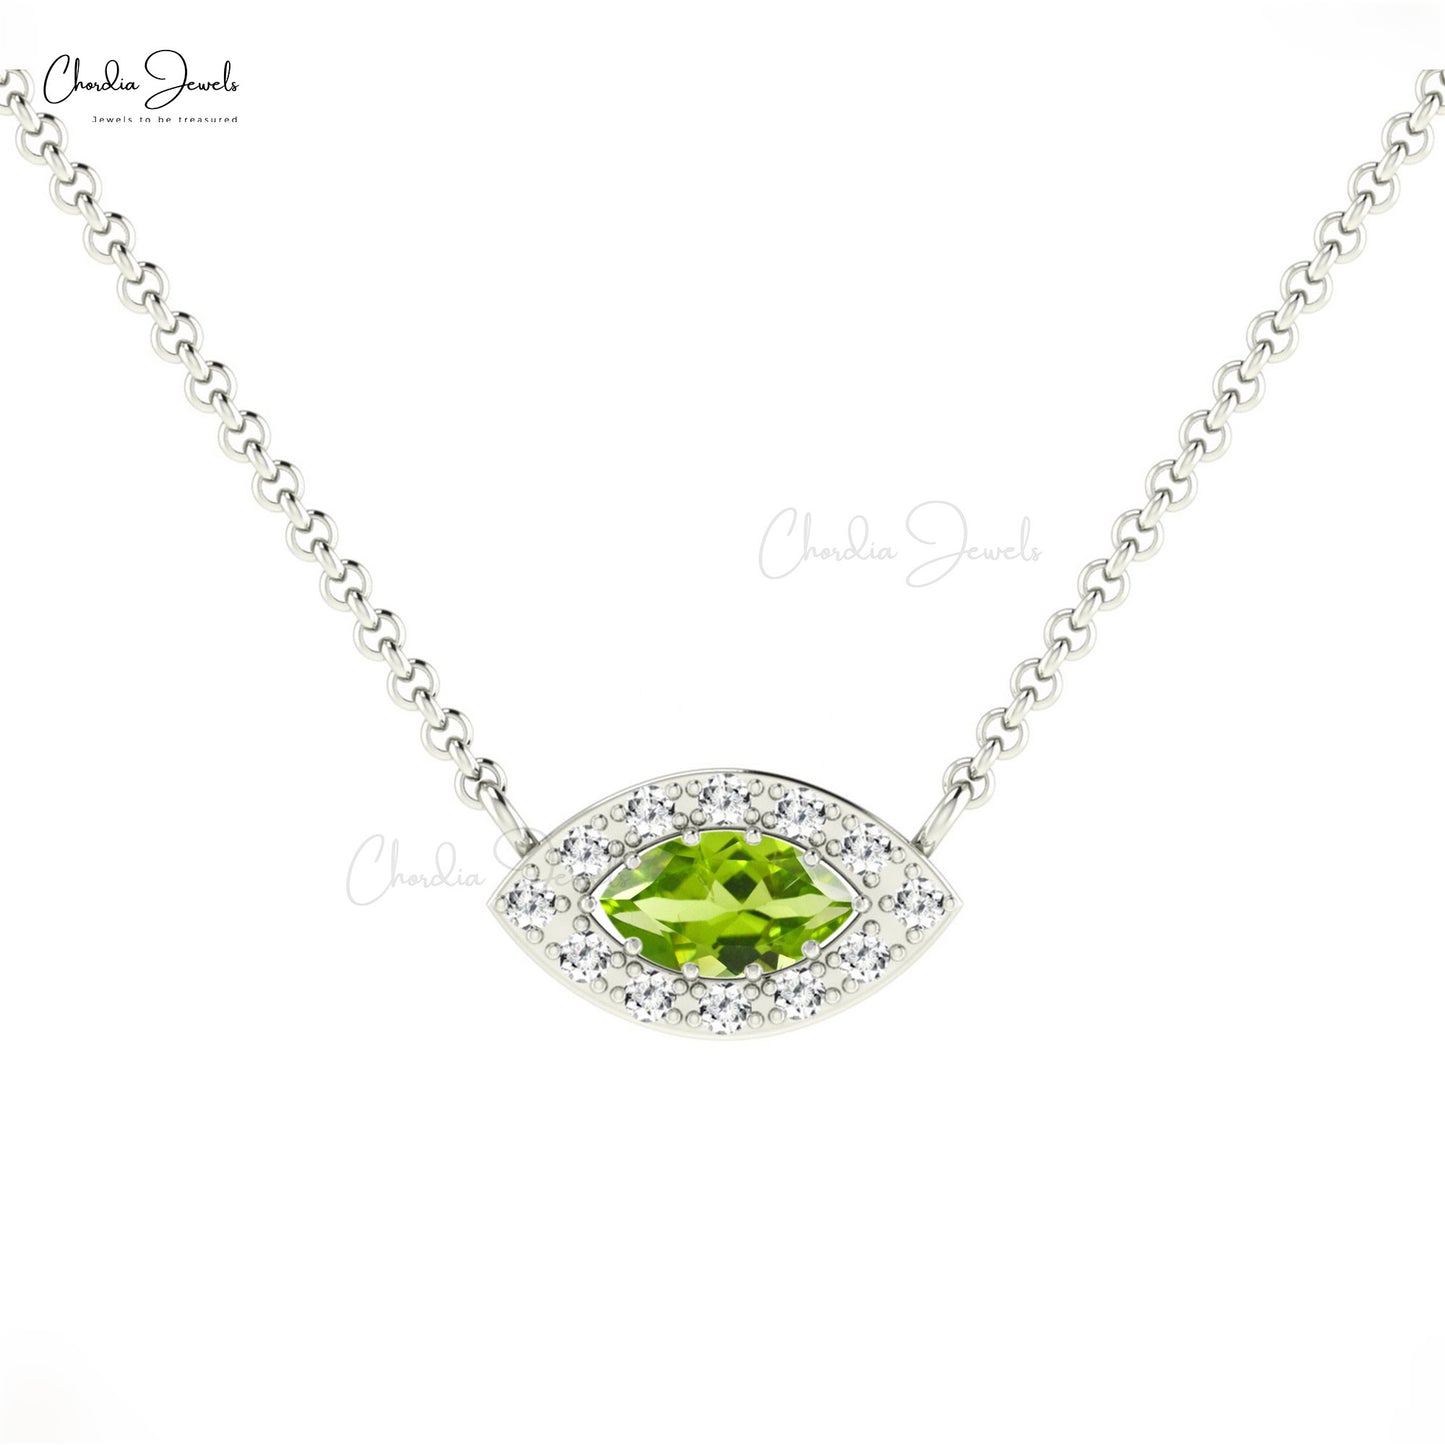 Load image into Gallery viewer, Trendy Marquise Cut Eye Shape Natural Gemstone Halo Necklace Pendant in 14k Pure Gold White Diamond and Green Peridot Necklace Hallmarked Jewelry For Her
